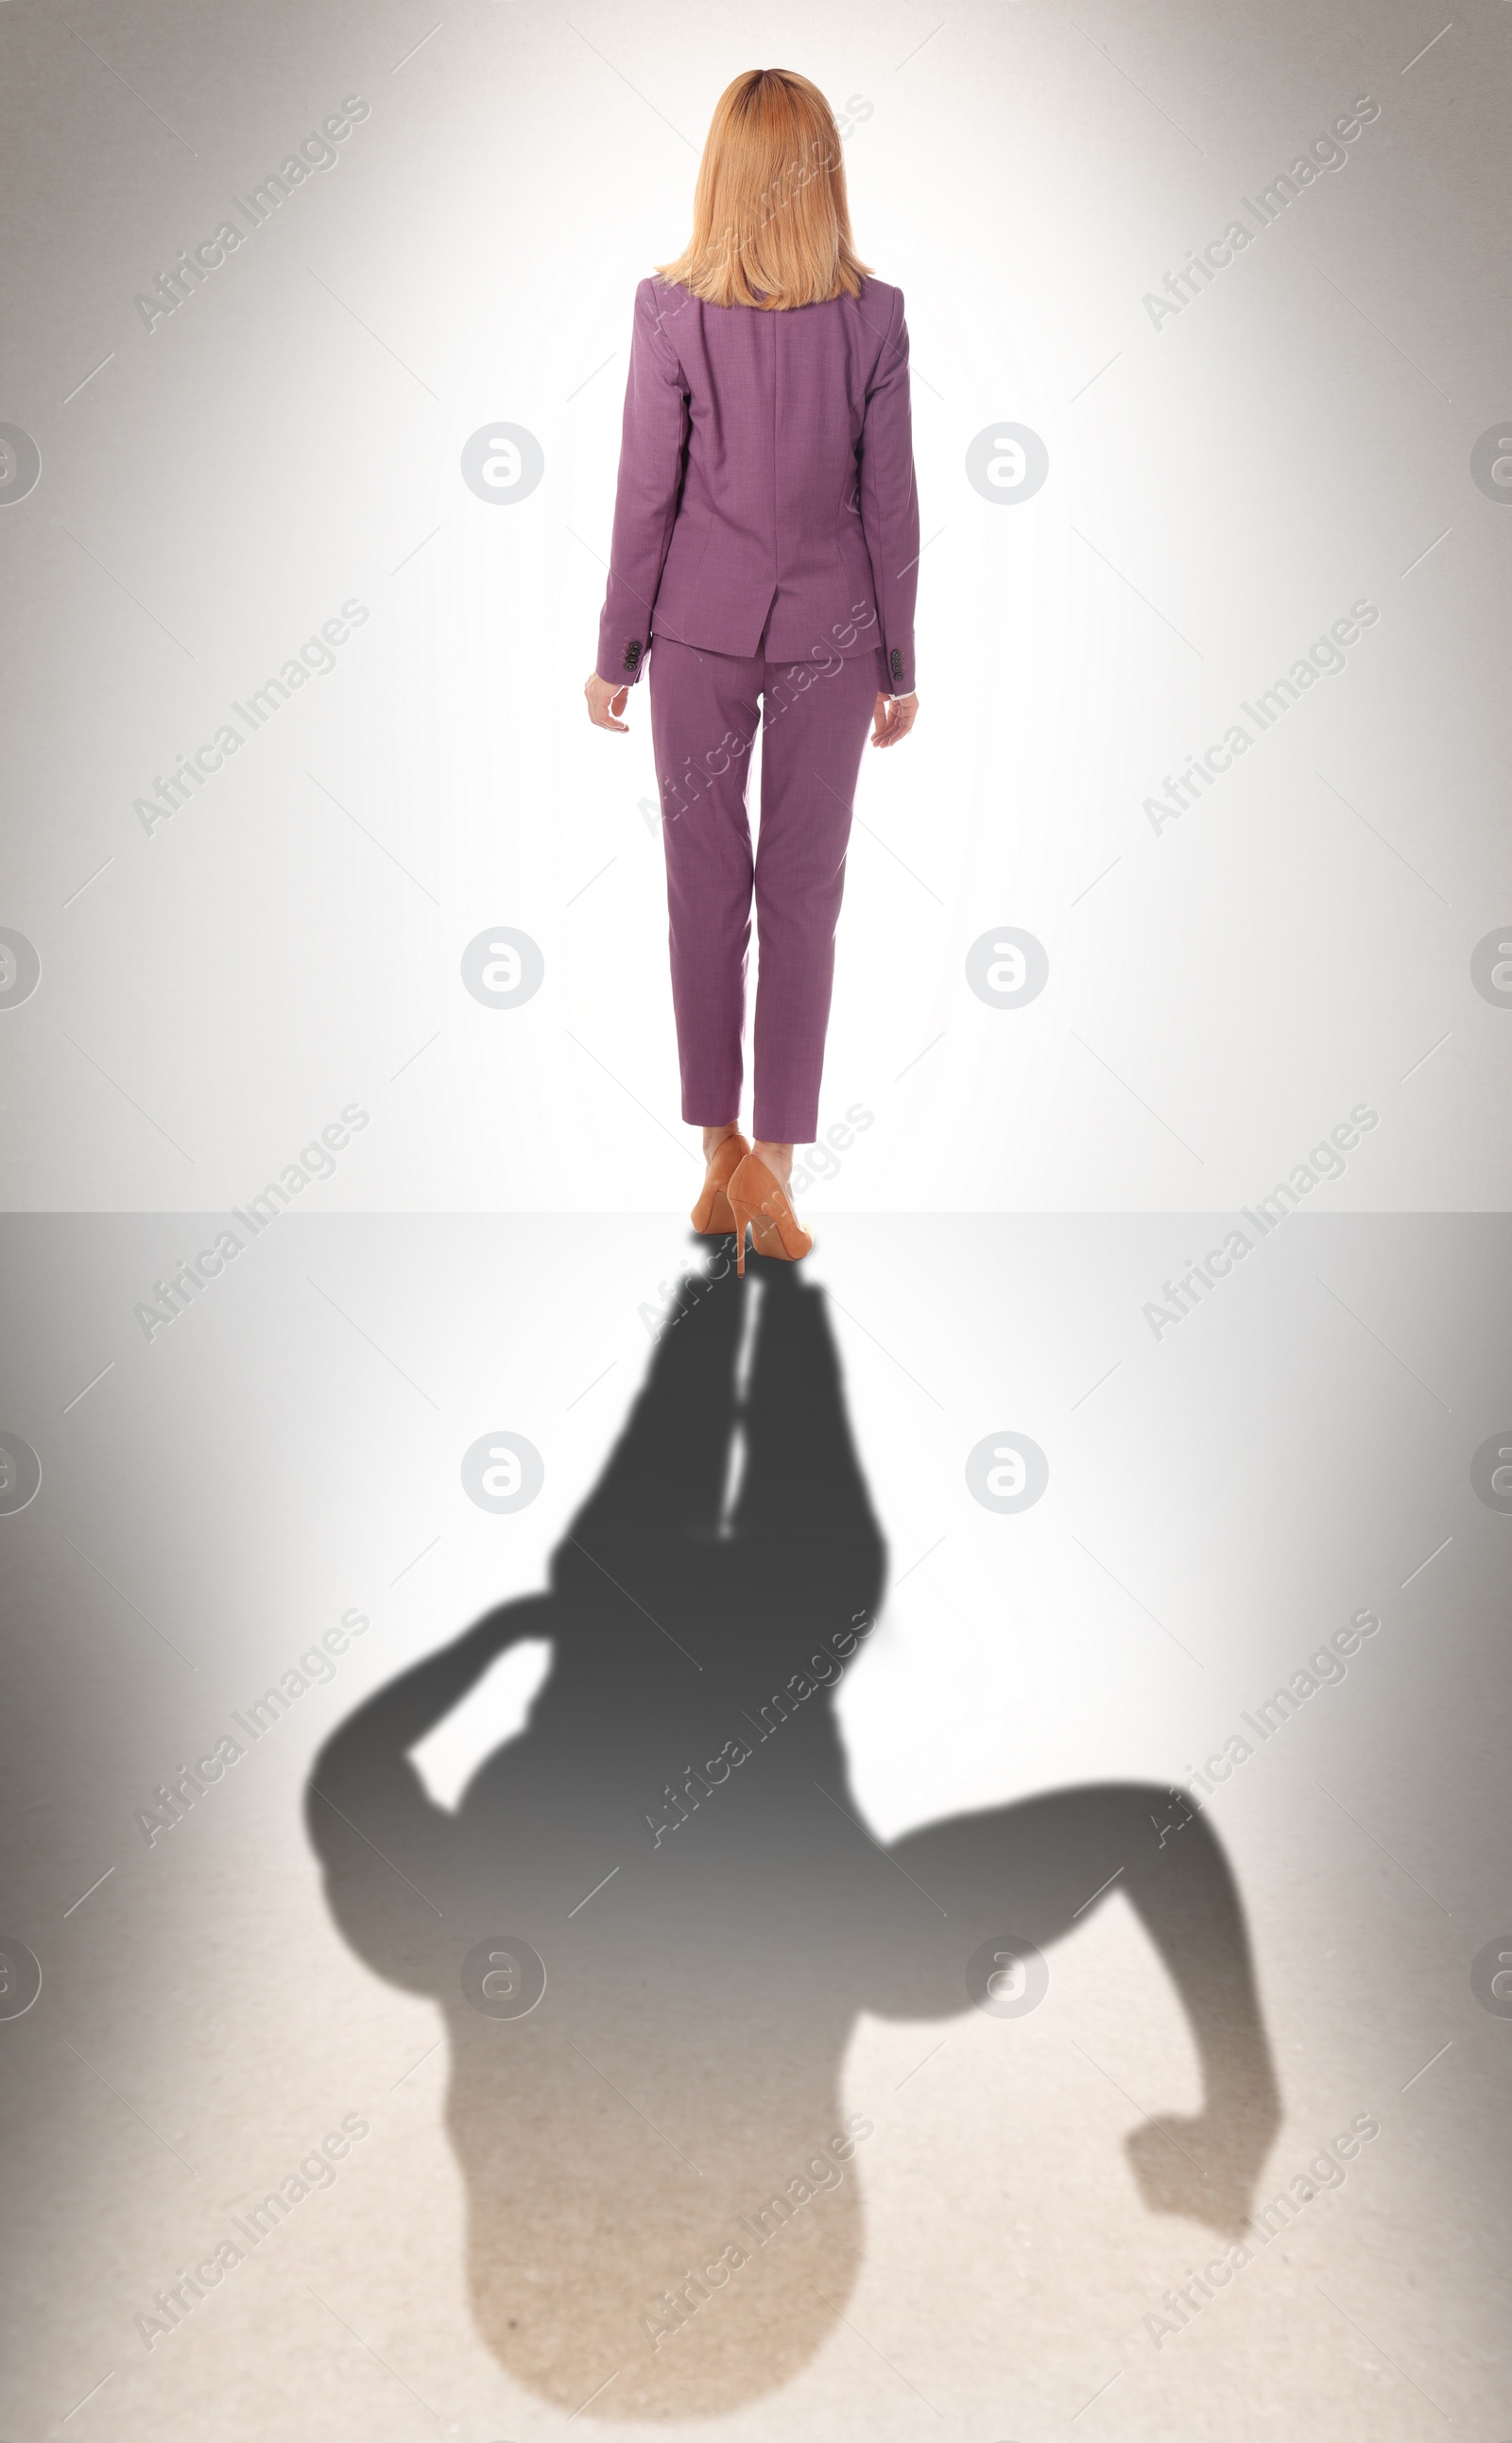 Image of Businesswoman and shadow of strong muscular lady behind her on light background. Concept of inner strength